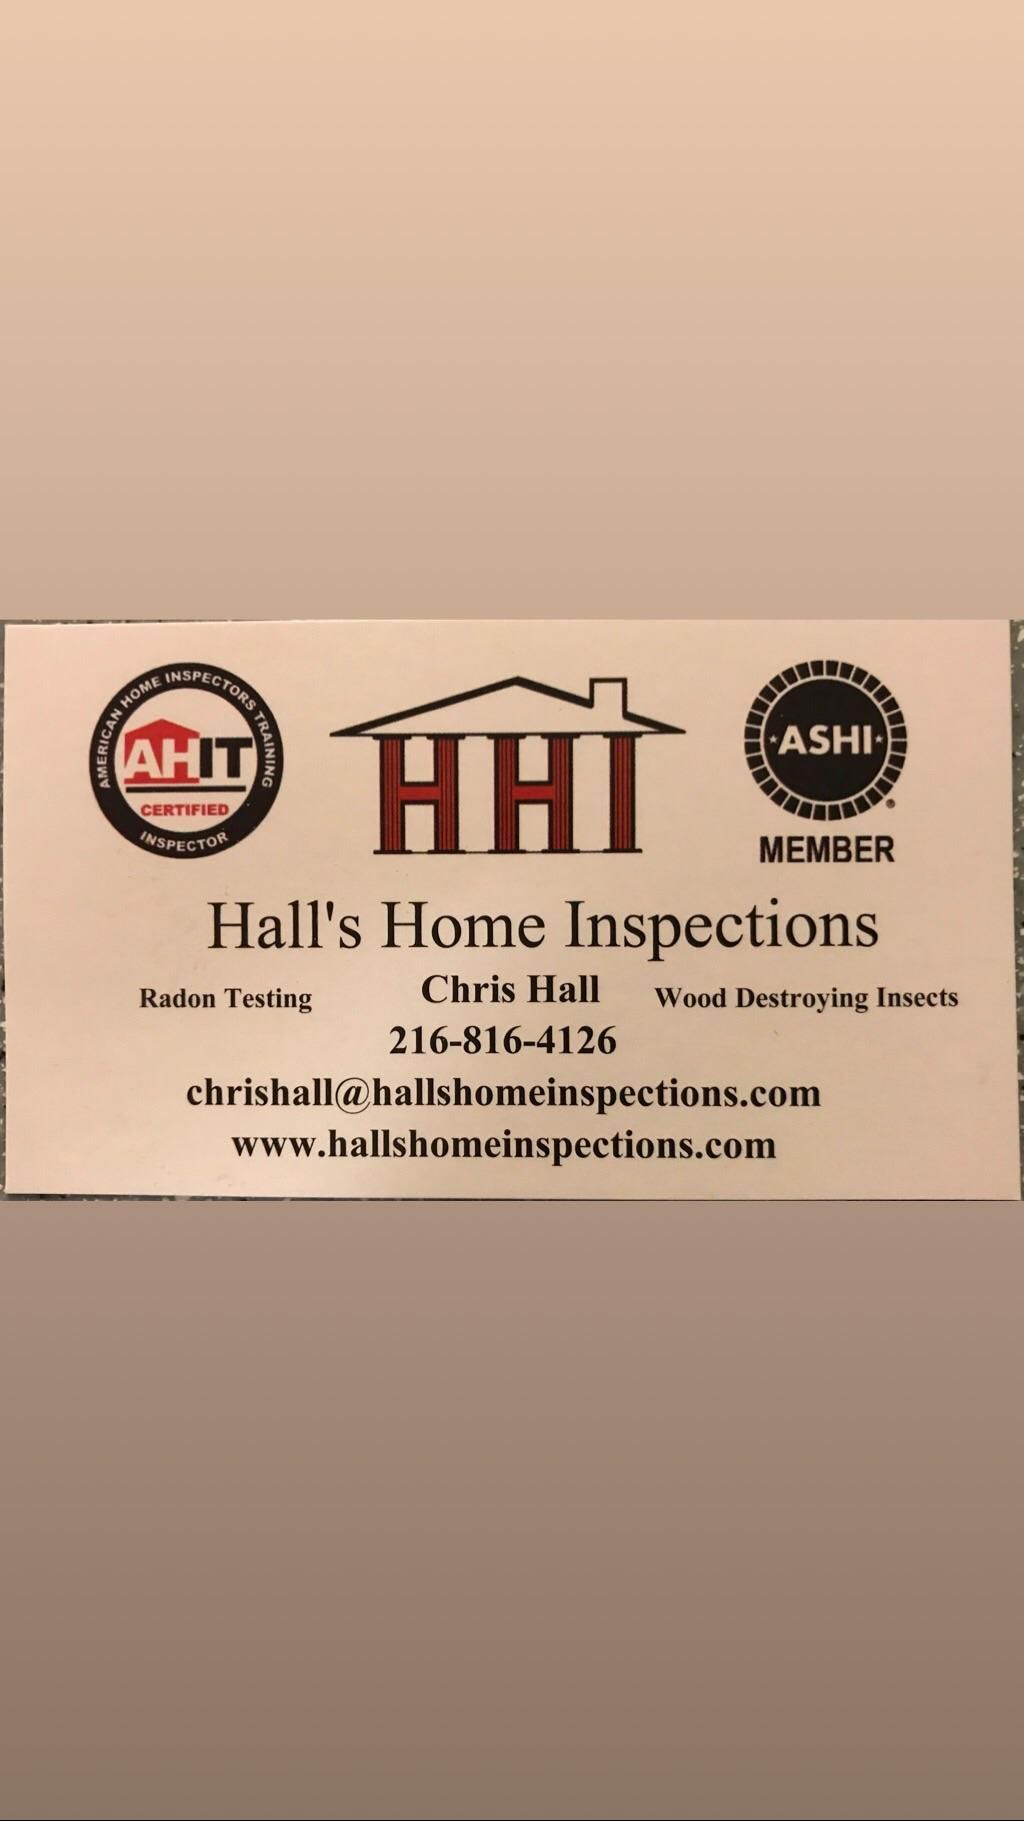 Hall’s Home Inspections, LLC.